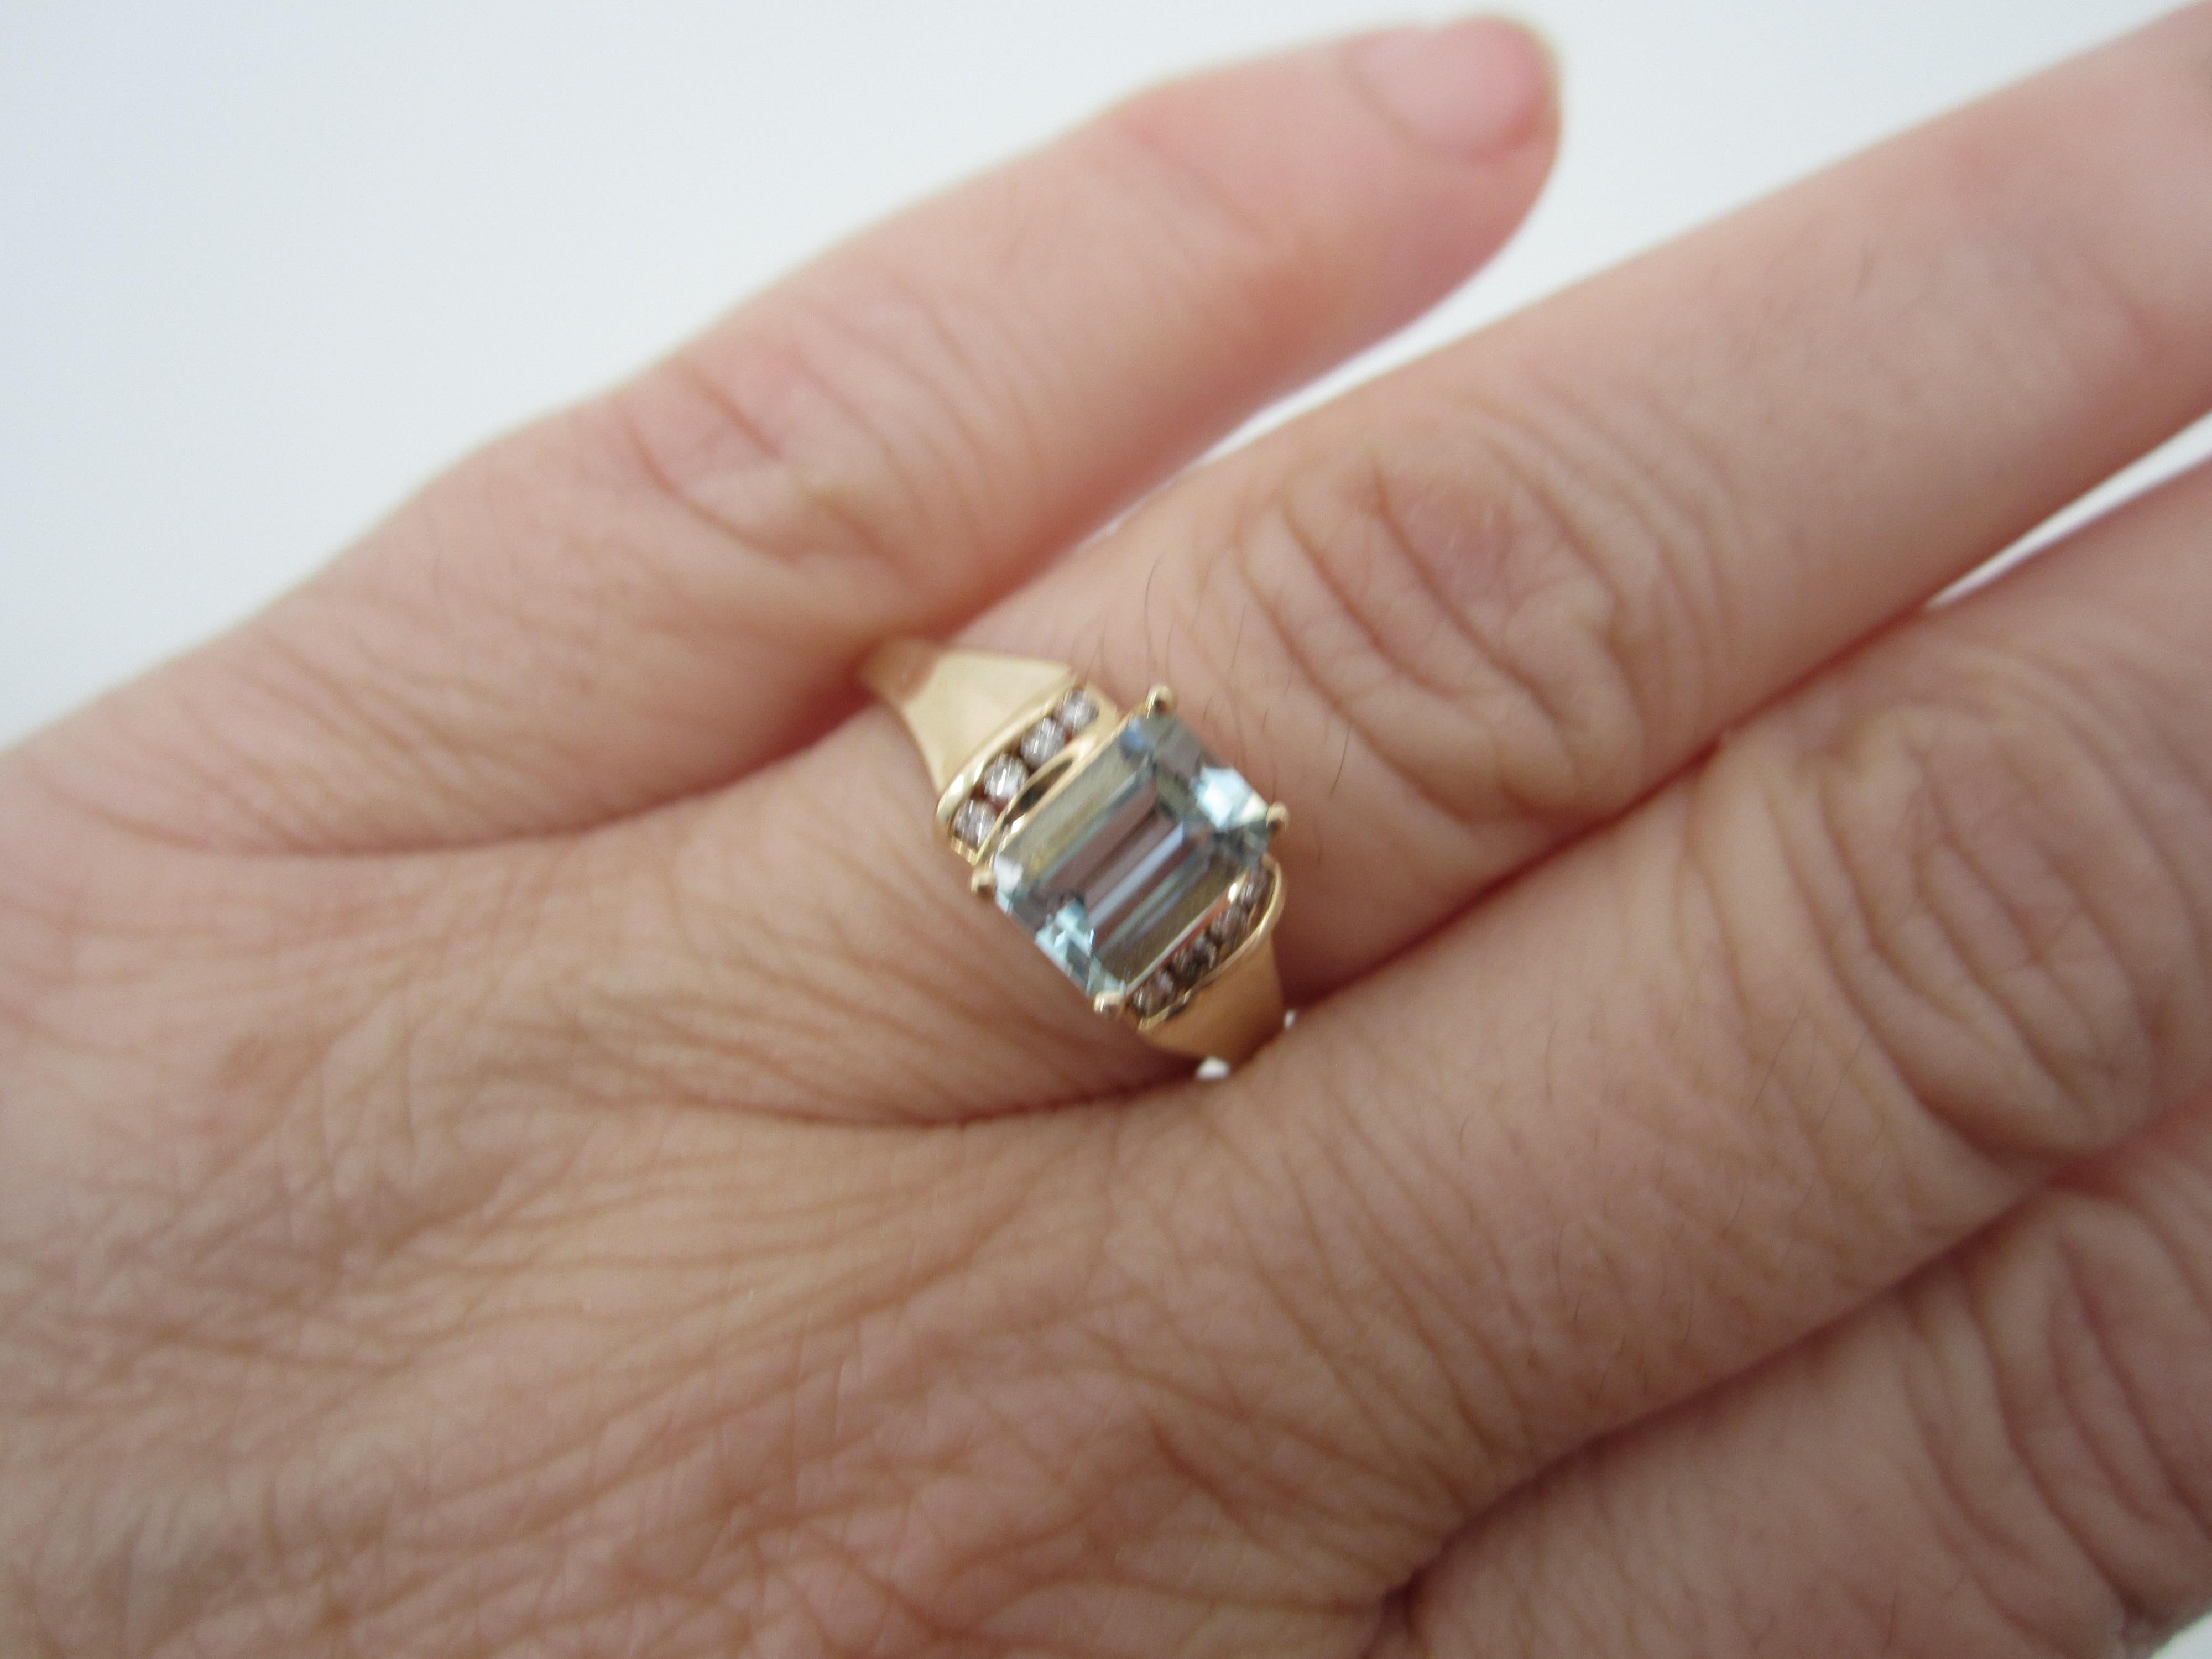 Modern in design, clean diamond accents on either side of the emerald cut aquamarine approximately 1.2 Carats. Diamonds adding up to approximately a 1/4 carat.  Ring is a size 9 and can be sized by us or your jeweler. Would be a lovely engagement